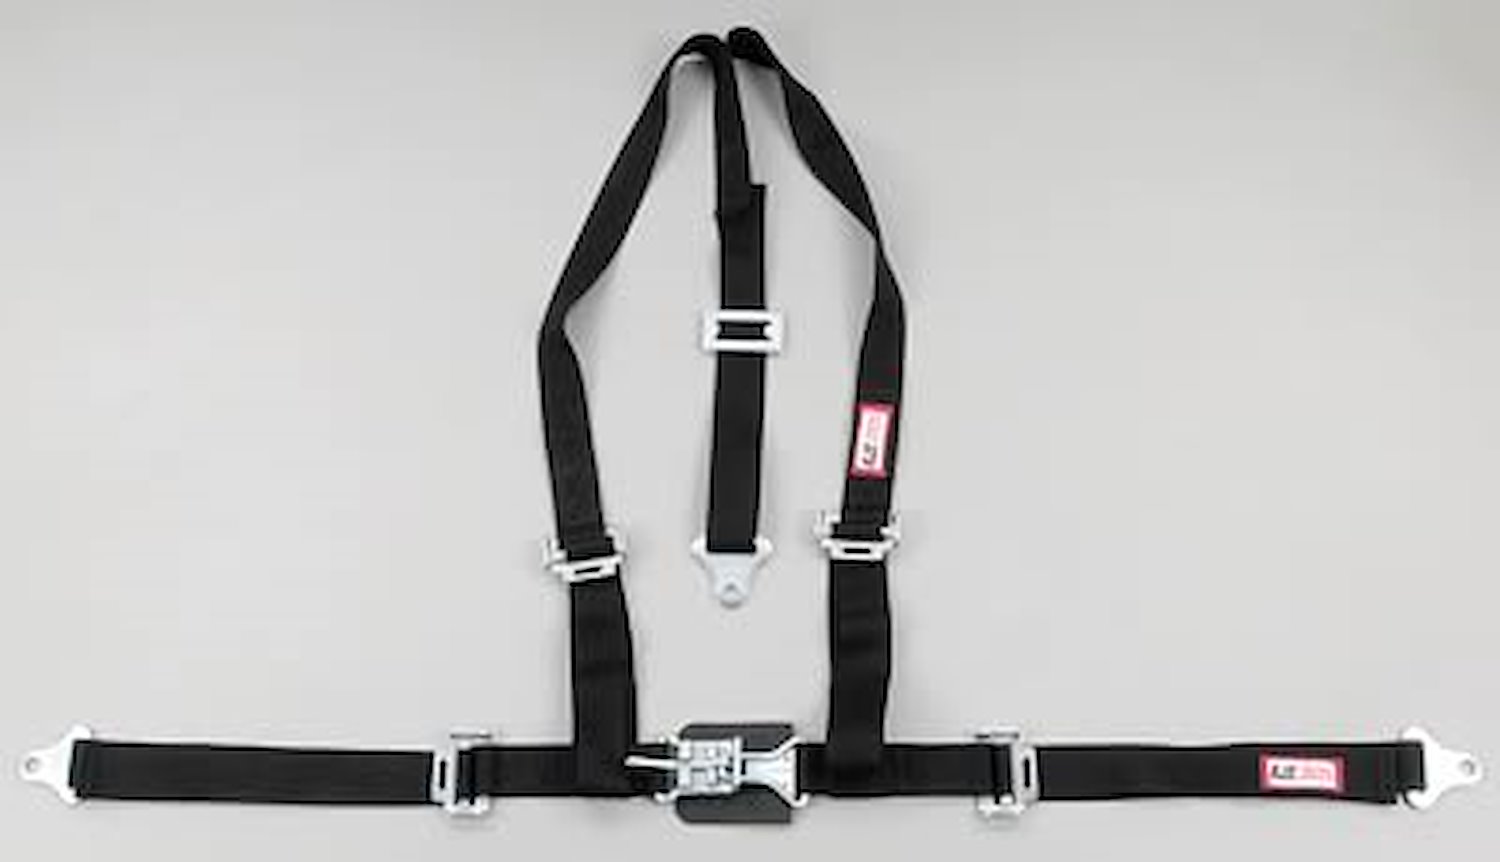 NON-SFI L&L HARNESS 2 PULL UP Lap Belt w/Adjuster 2 S.H. Y FLOOR MOUNT w/STERNUM STRAP ALL WRAP ENDS YELLOW